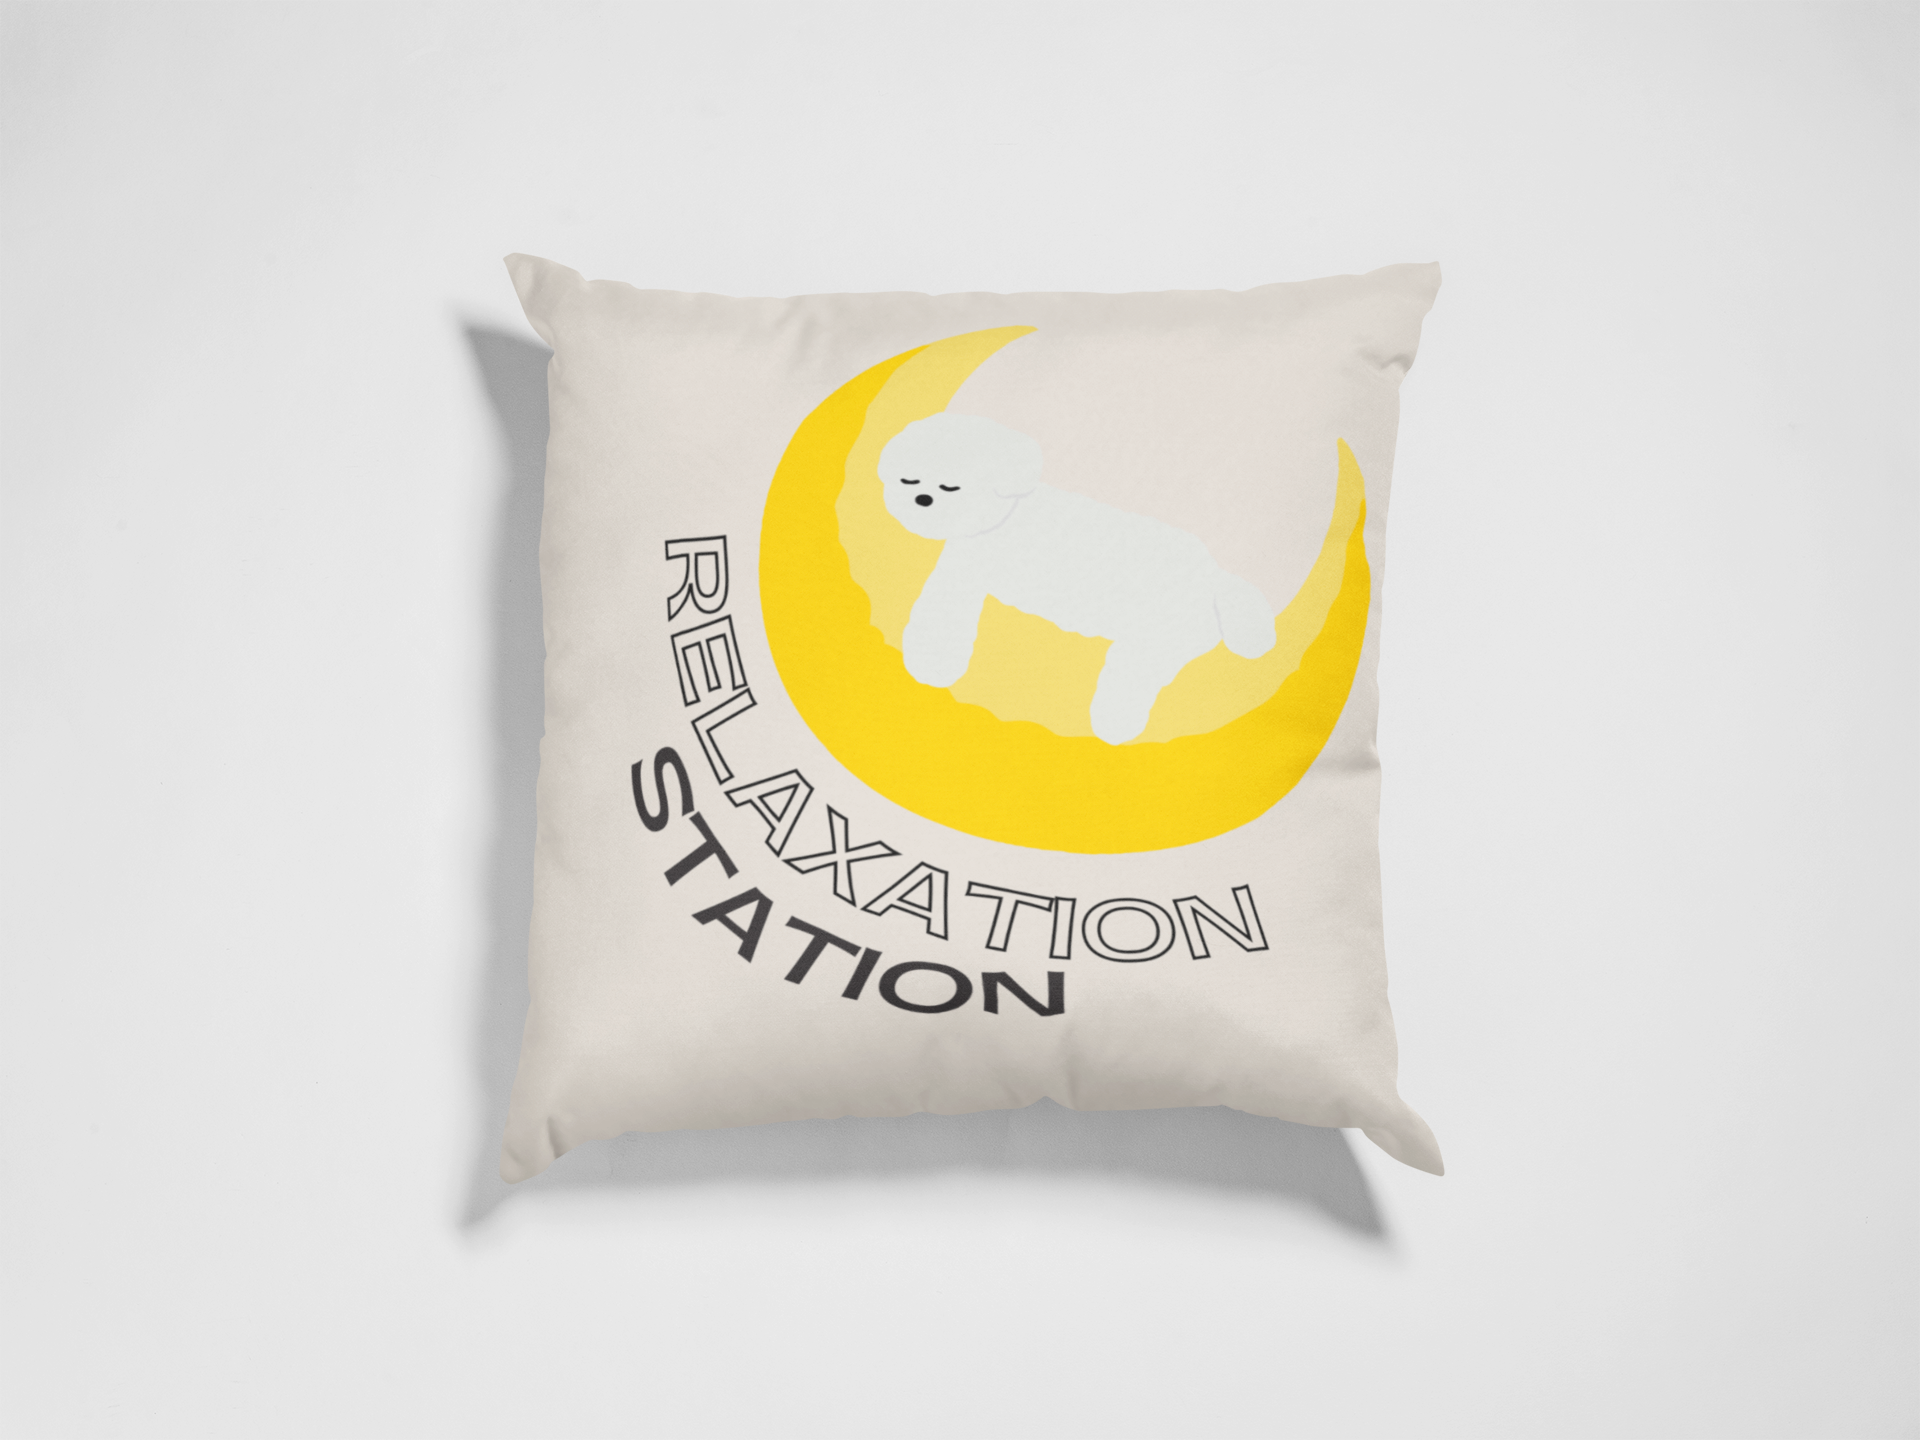 Relaxation Station Cushion